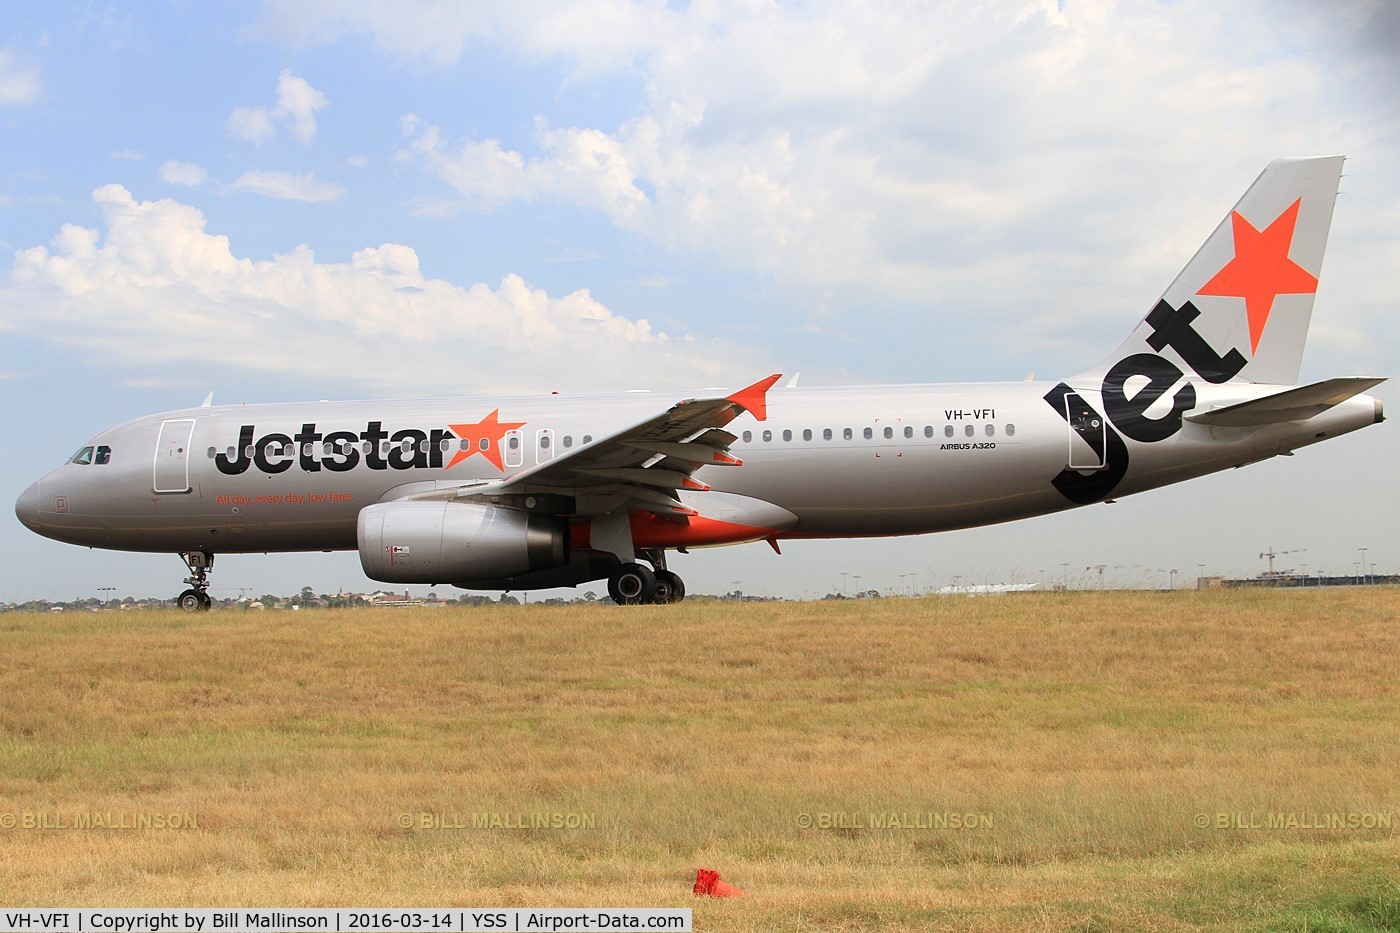 VH-VFI, 2012 Airbus A320-232 C/N 5270, taxiing past The Mound